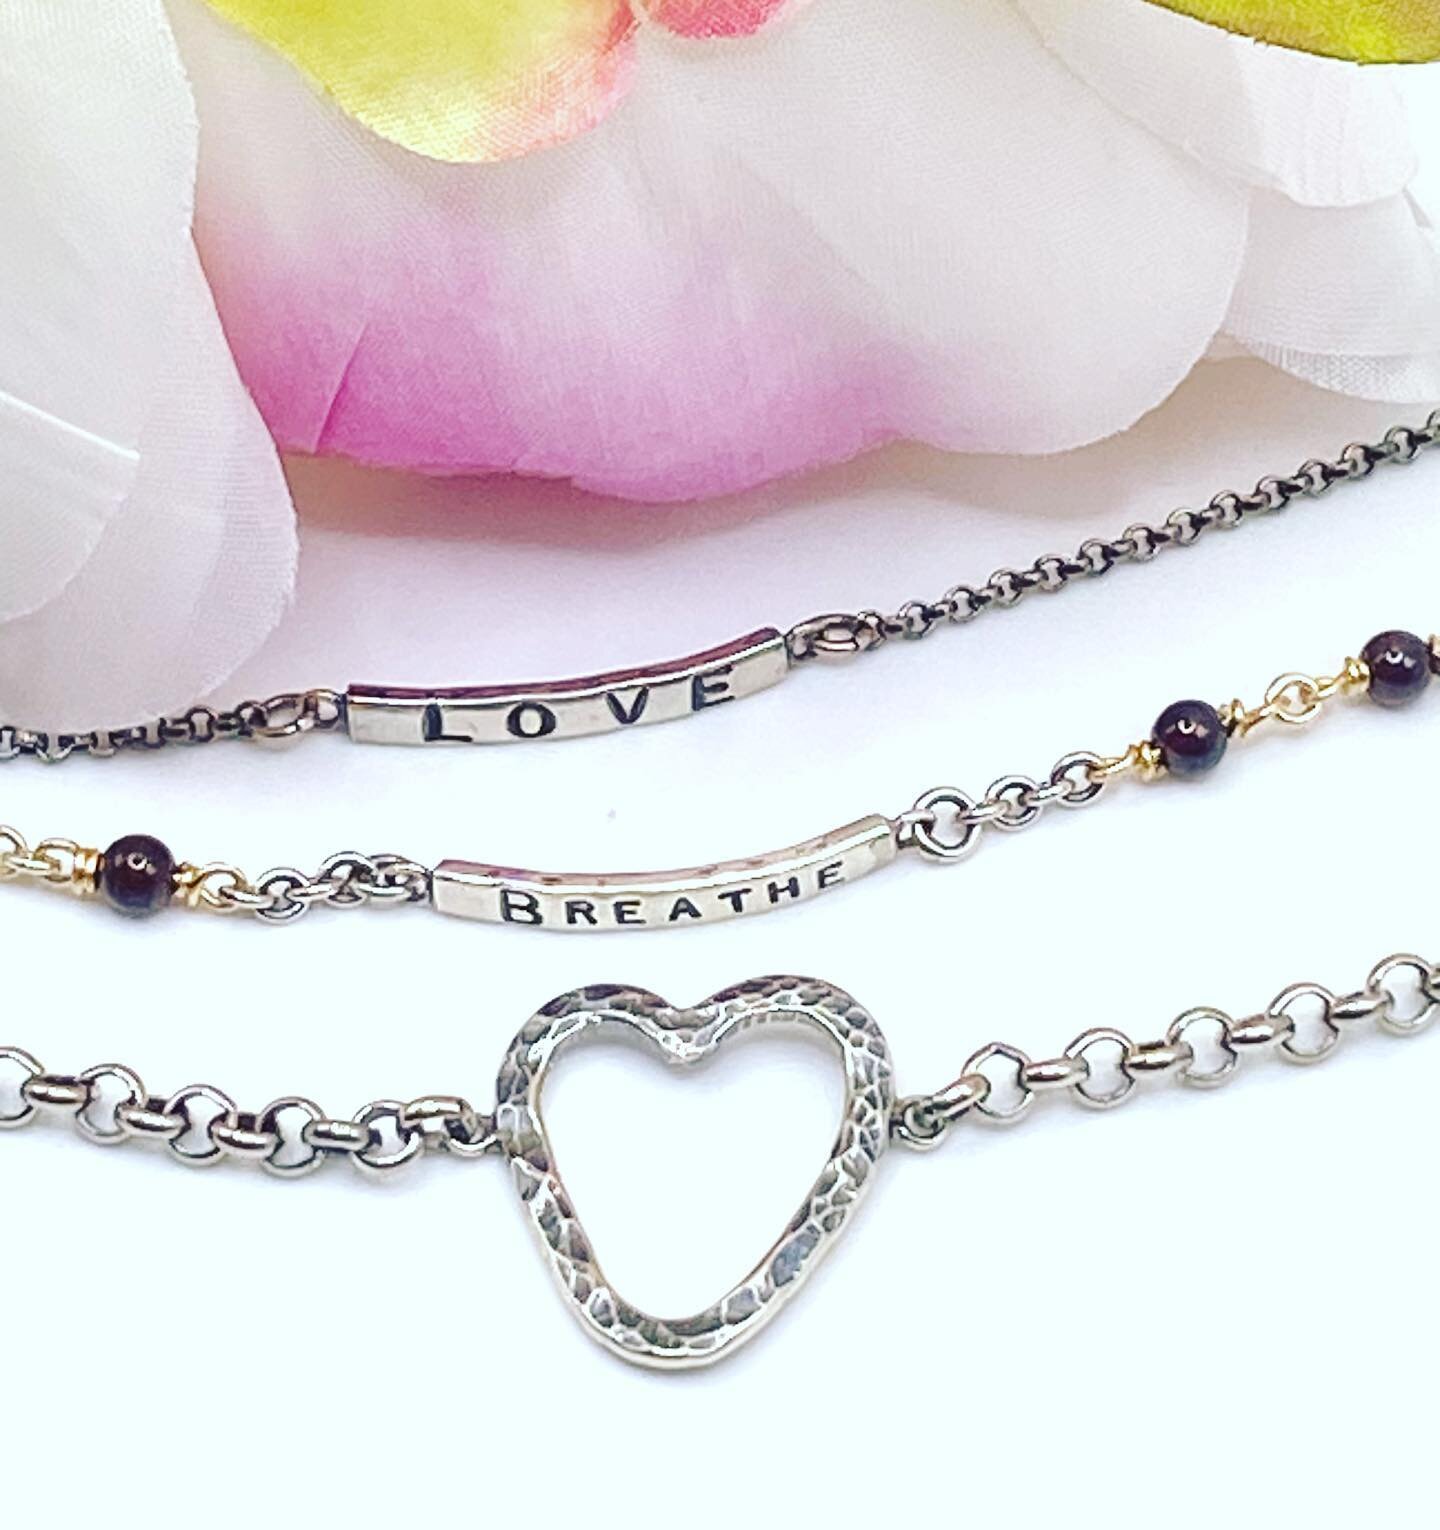 We have so many pretty things for Mother&rsquo;s Day! Stop by! 💖 #gairussojewelry #heartbracelet #lovebracelet #love #breathe #yogamom #shopdtw #shopcle #shoplocal #shopsmall #mom #mothersday